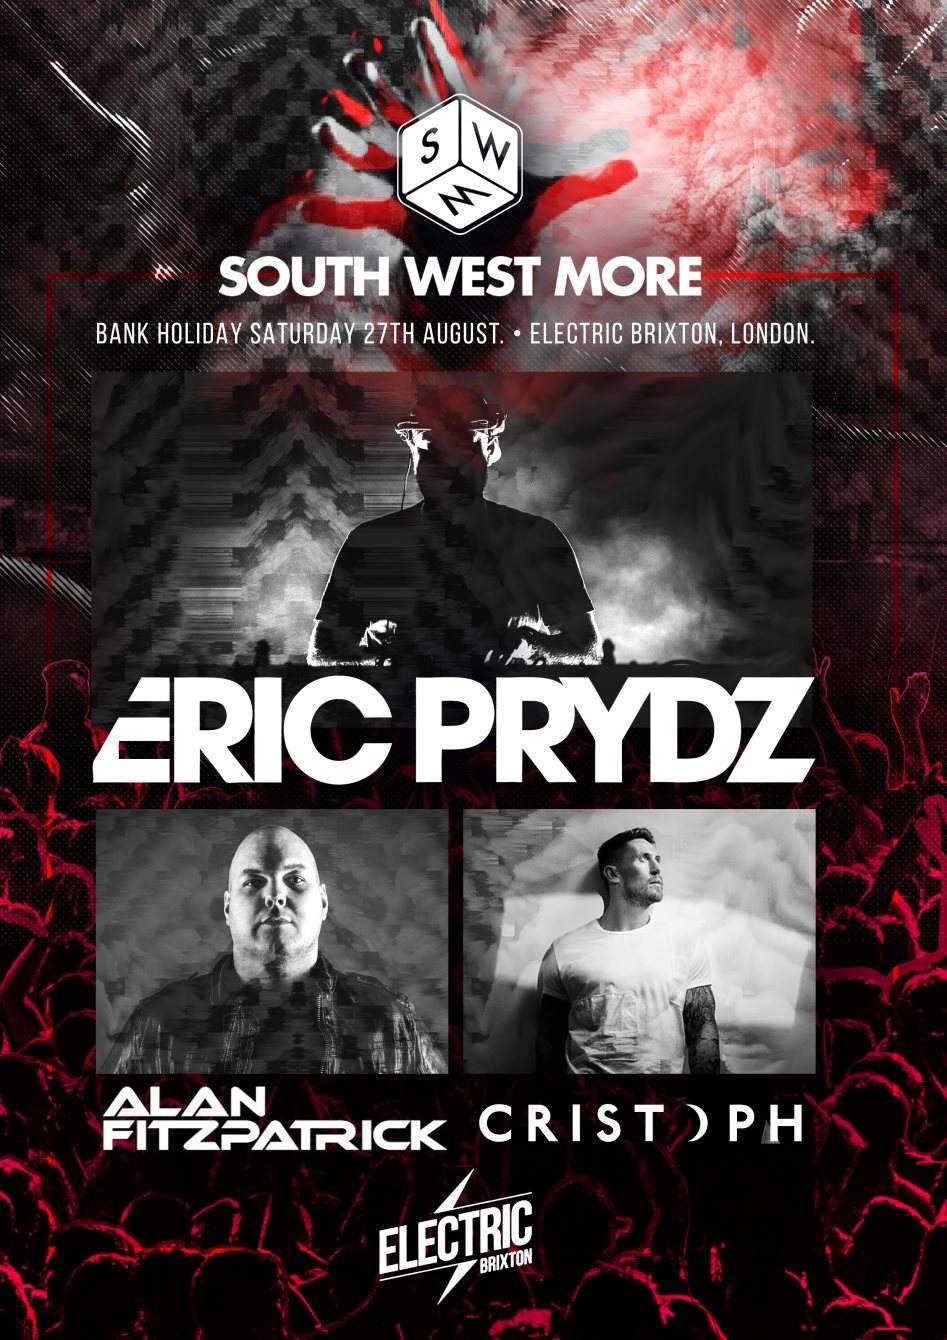 South West More Saturday with Eric Prydz & Alan Fitzpatrick - Página trasera